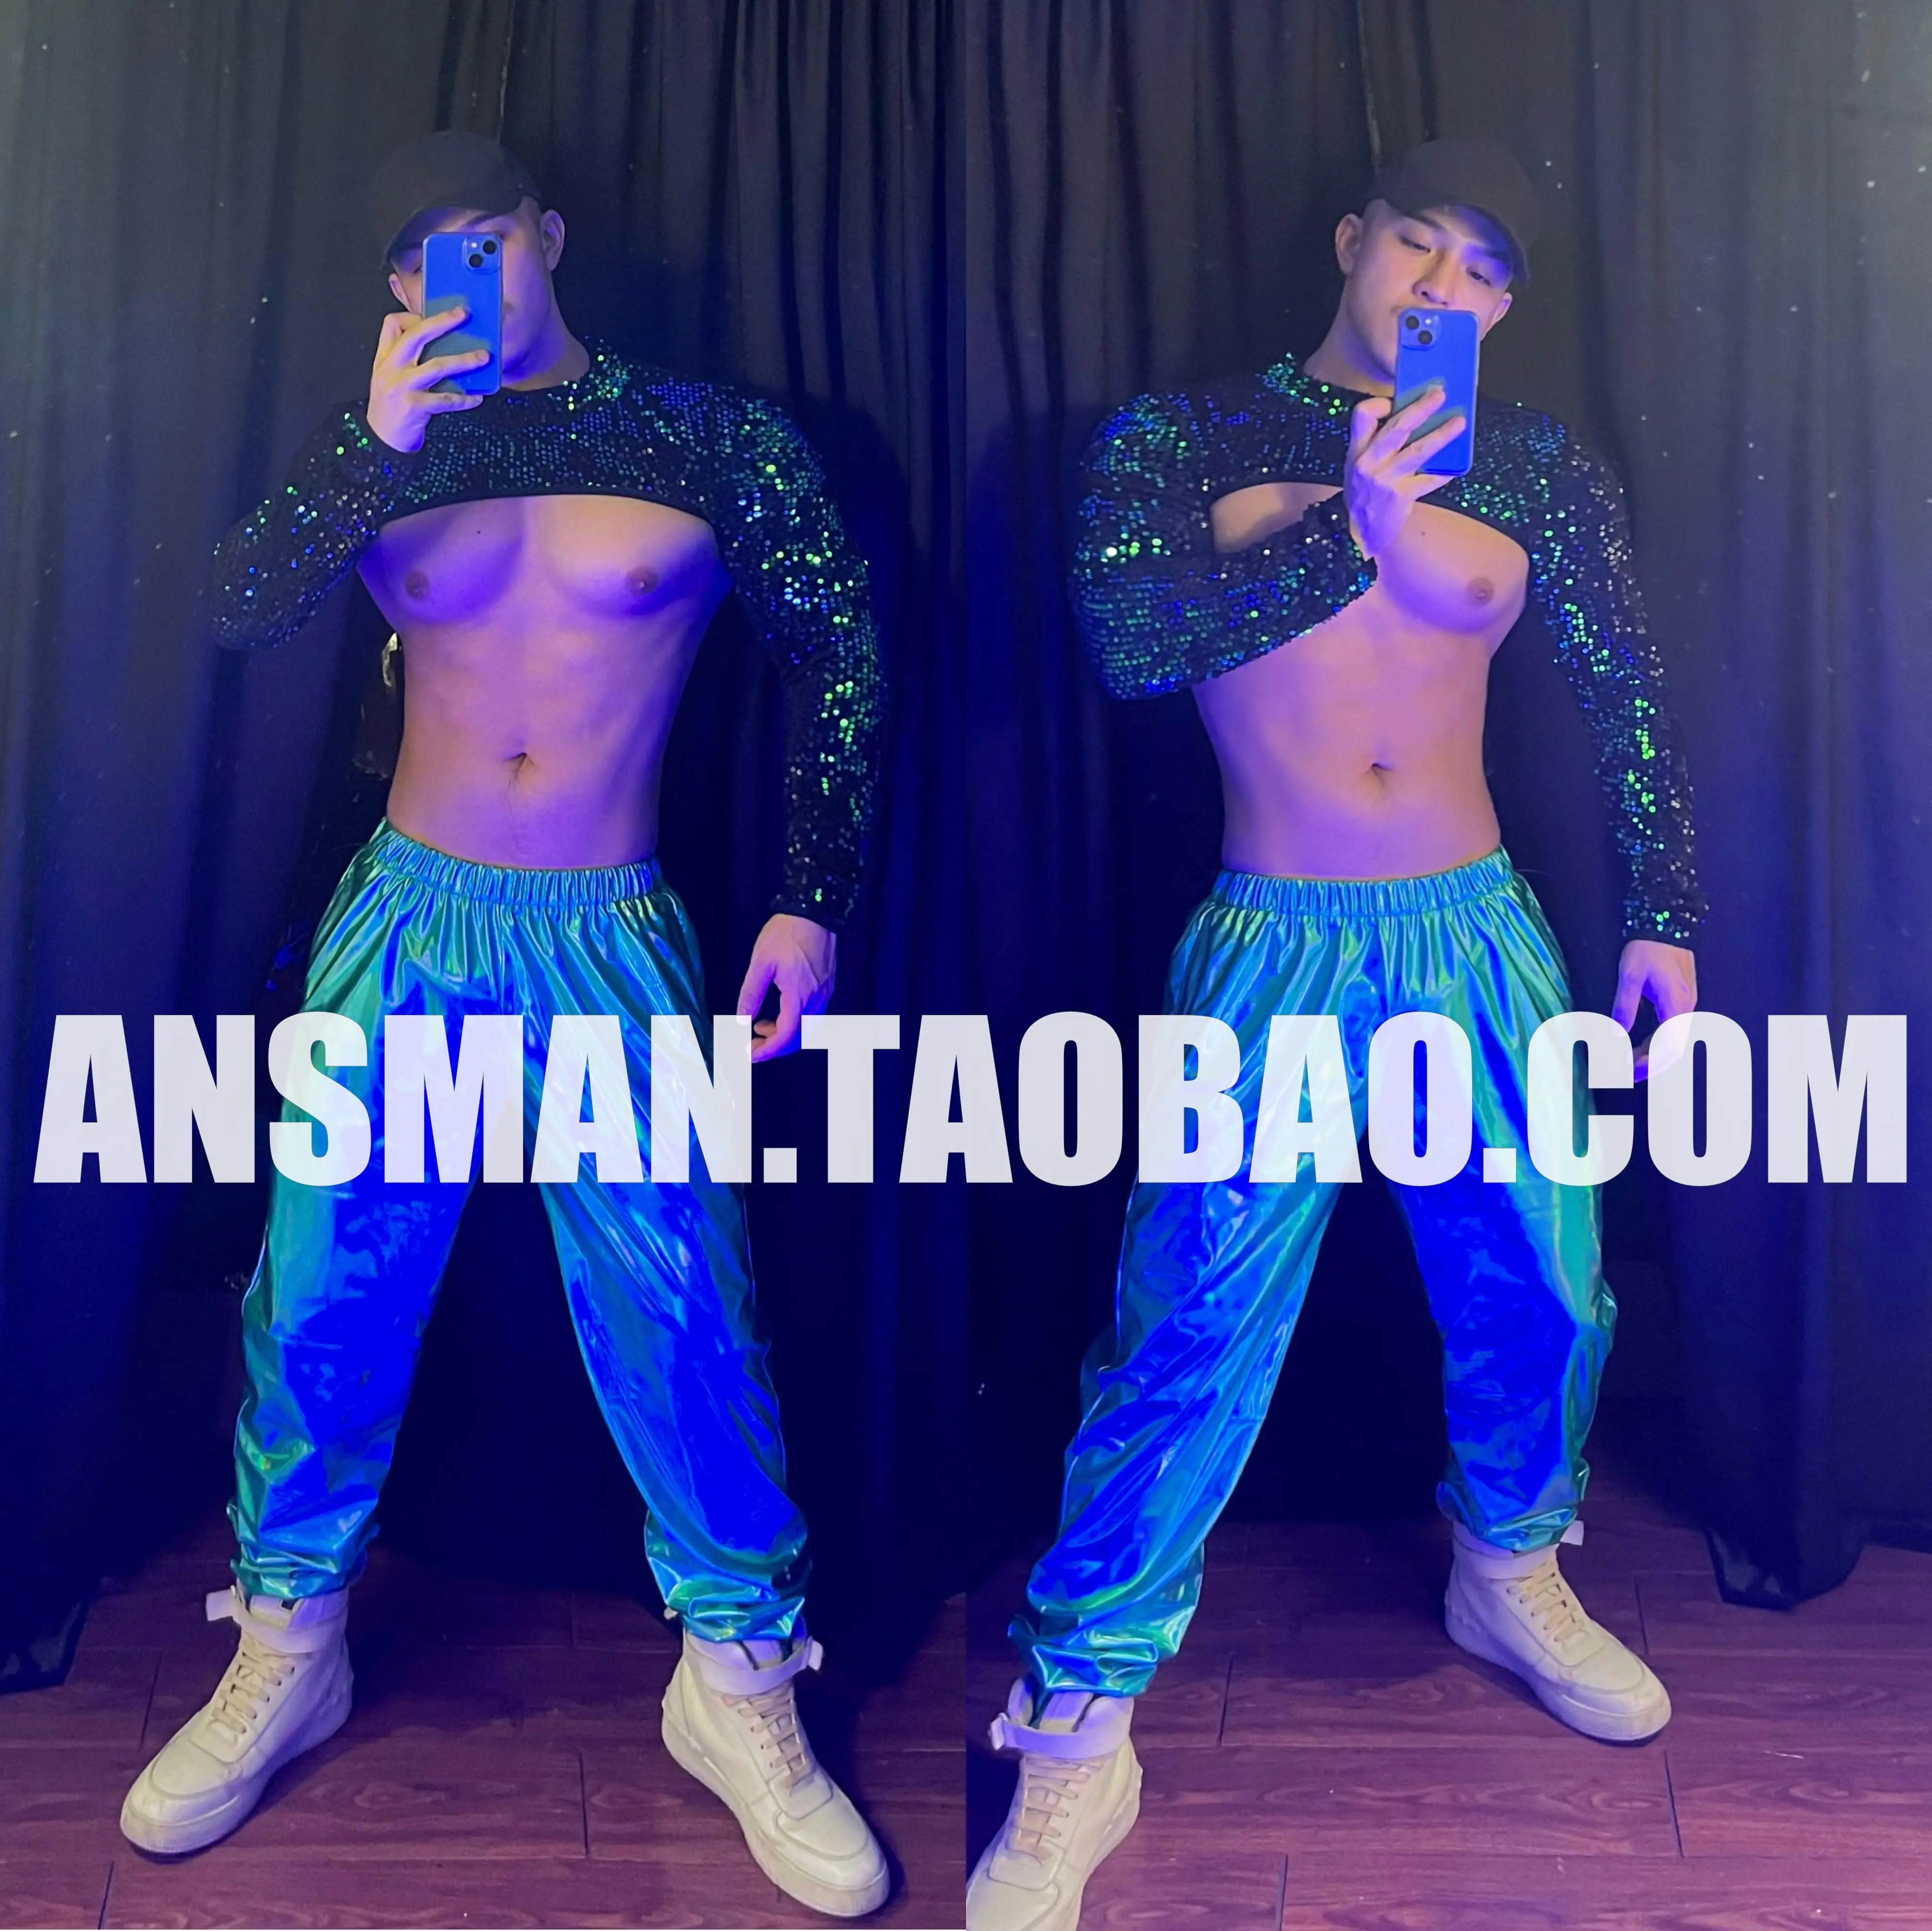 Men Jogging Tracksuit Set Long Sleeved Colorful Sequin Top Pants New Male Singer Dance Nightclub Bar Christmas Stage Outfits